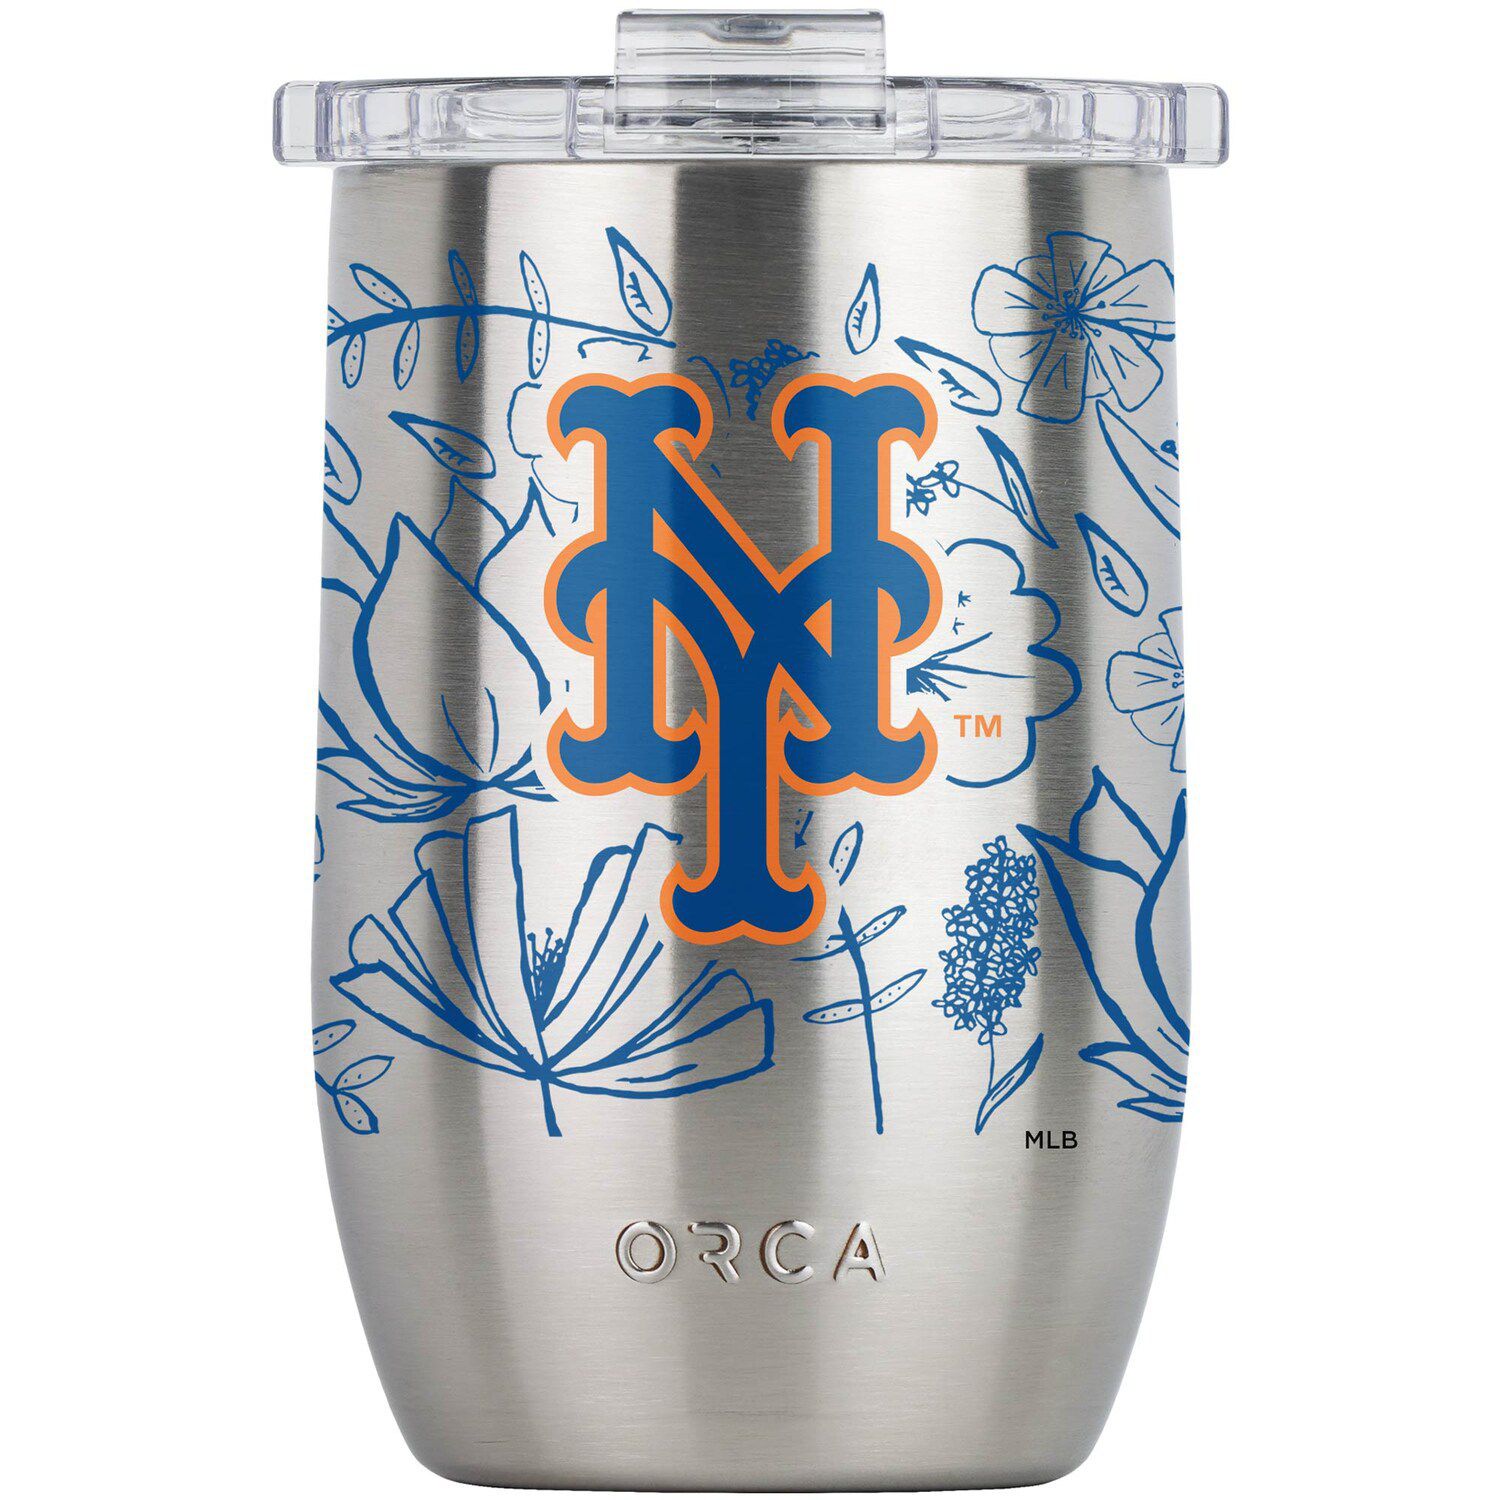 Image for Unbranded ORCA New York Mets 12oz. Vino Floral Tumbler at Kohl's.